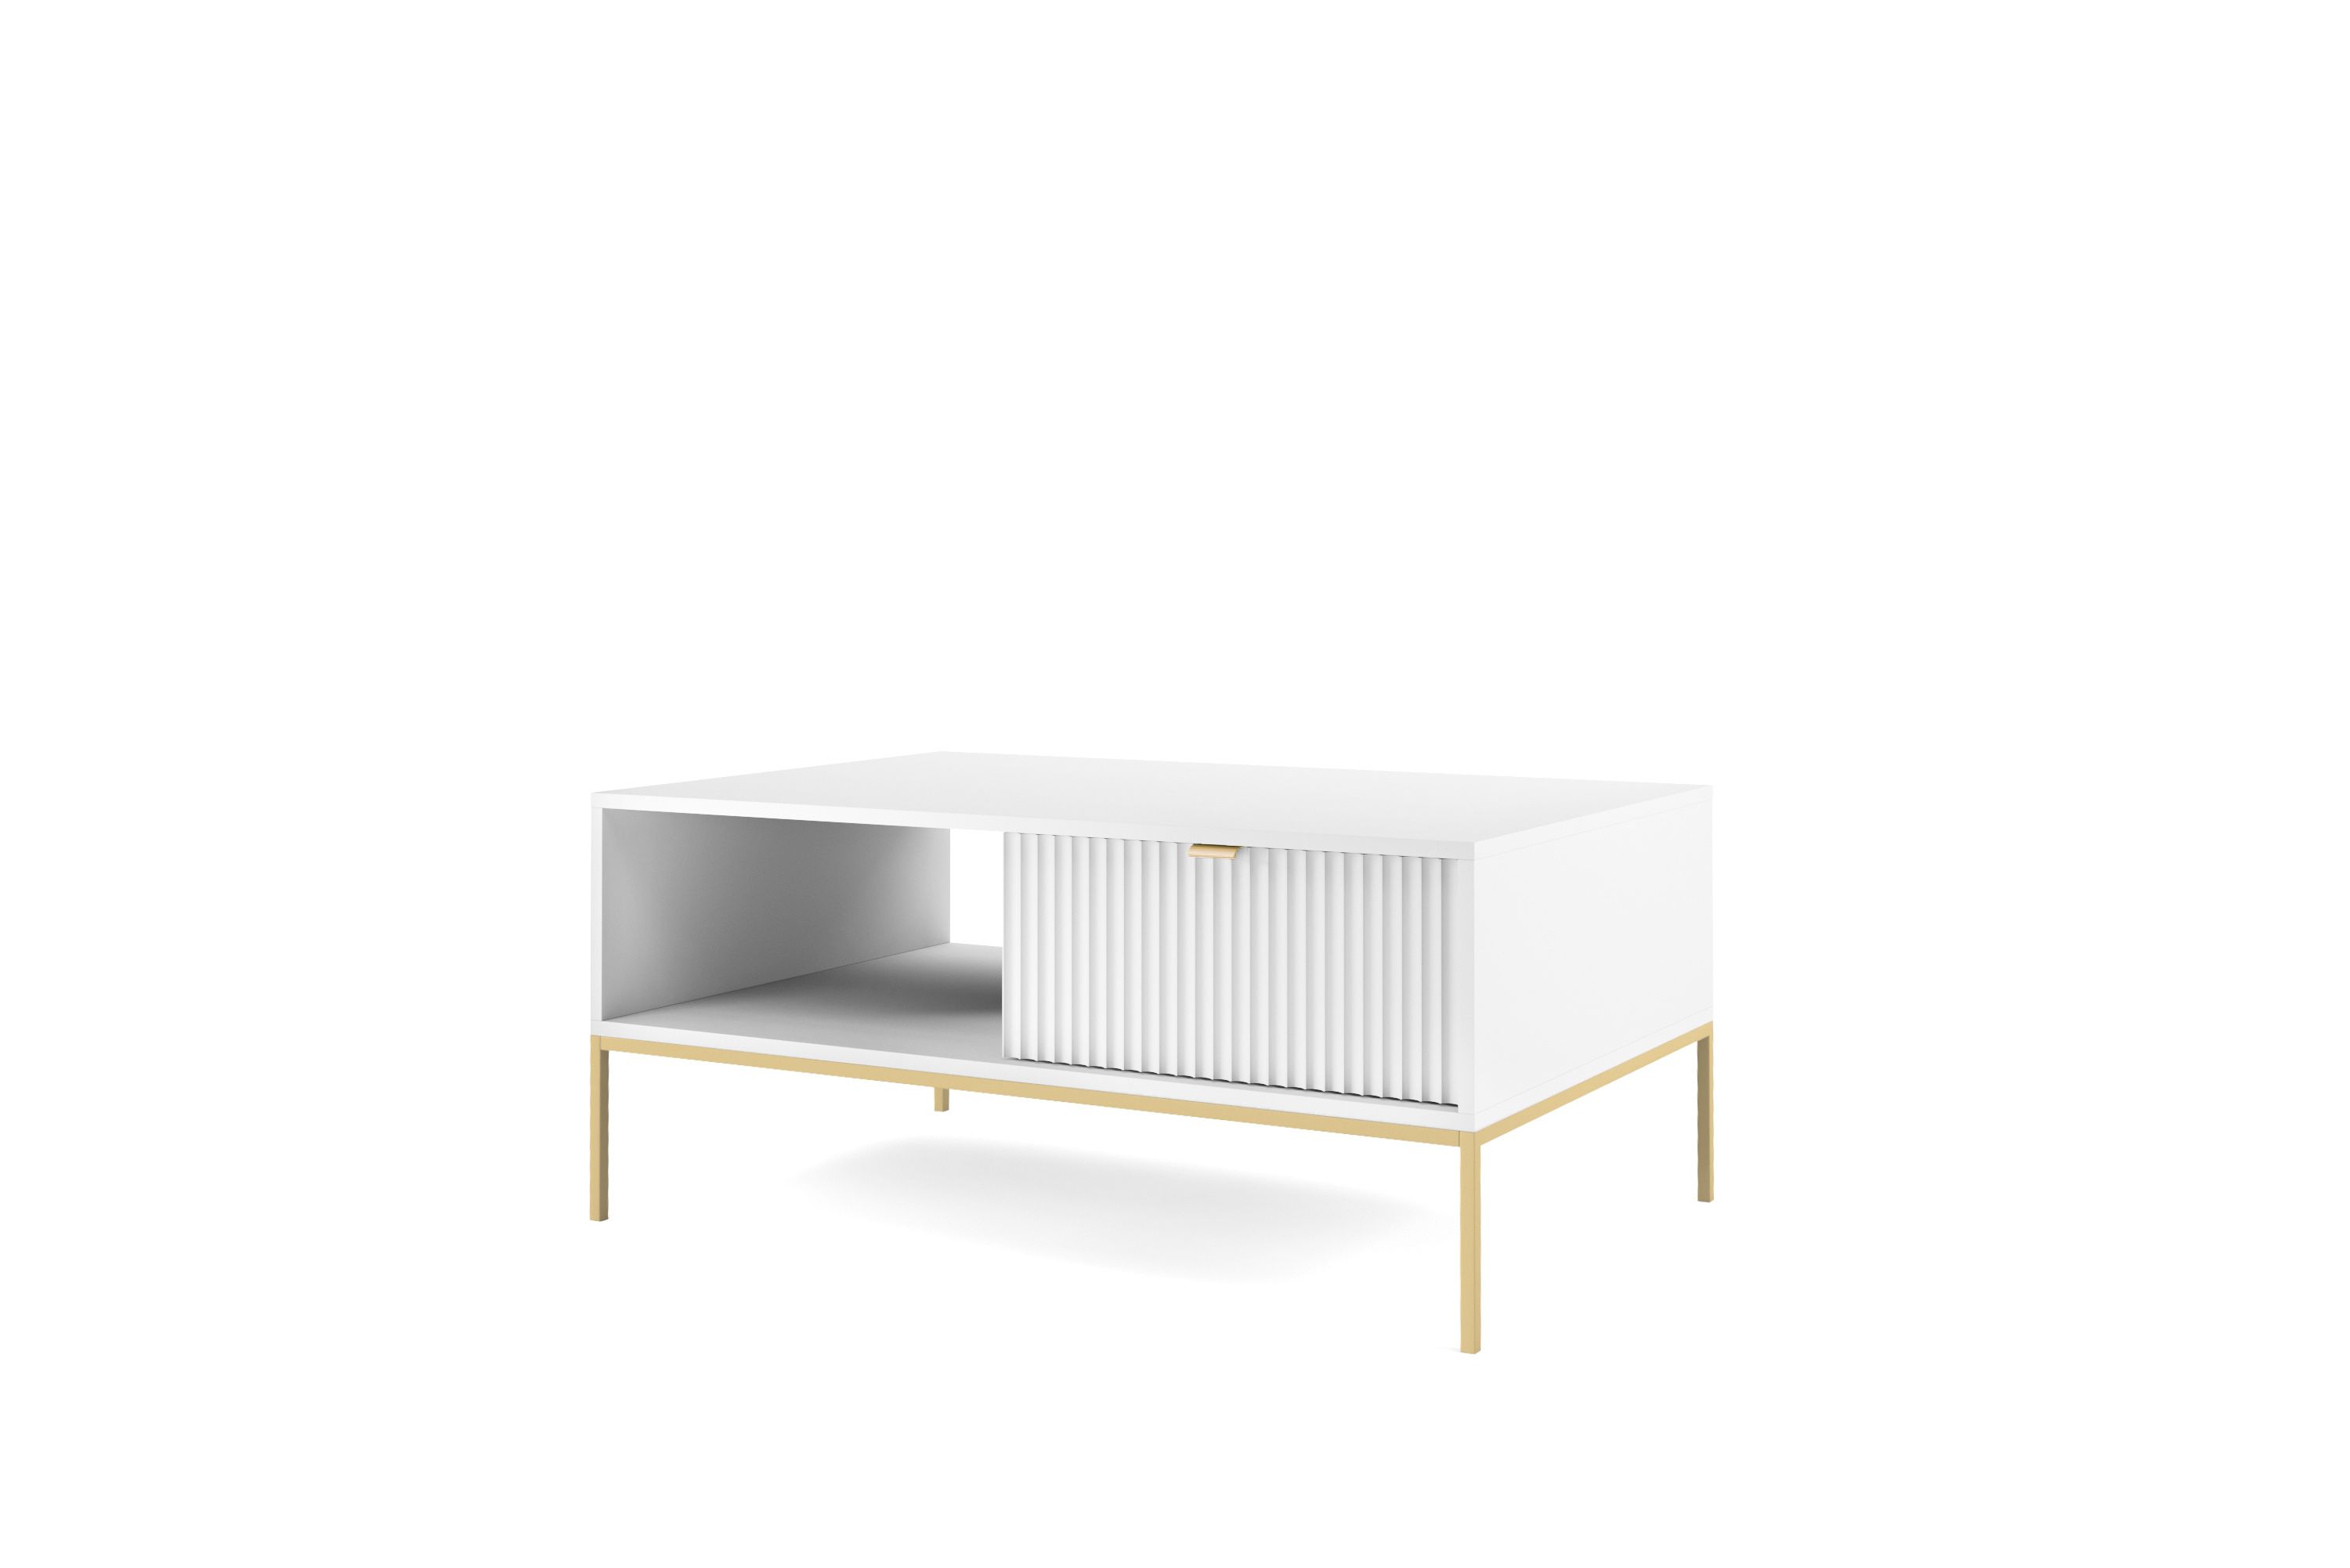 Table basse Worthing 27, Couleur : Blanc / Or - Dimensions : 46 x 104 x 68 cm (H x L x P)